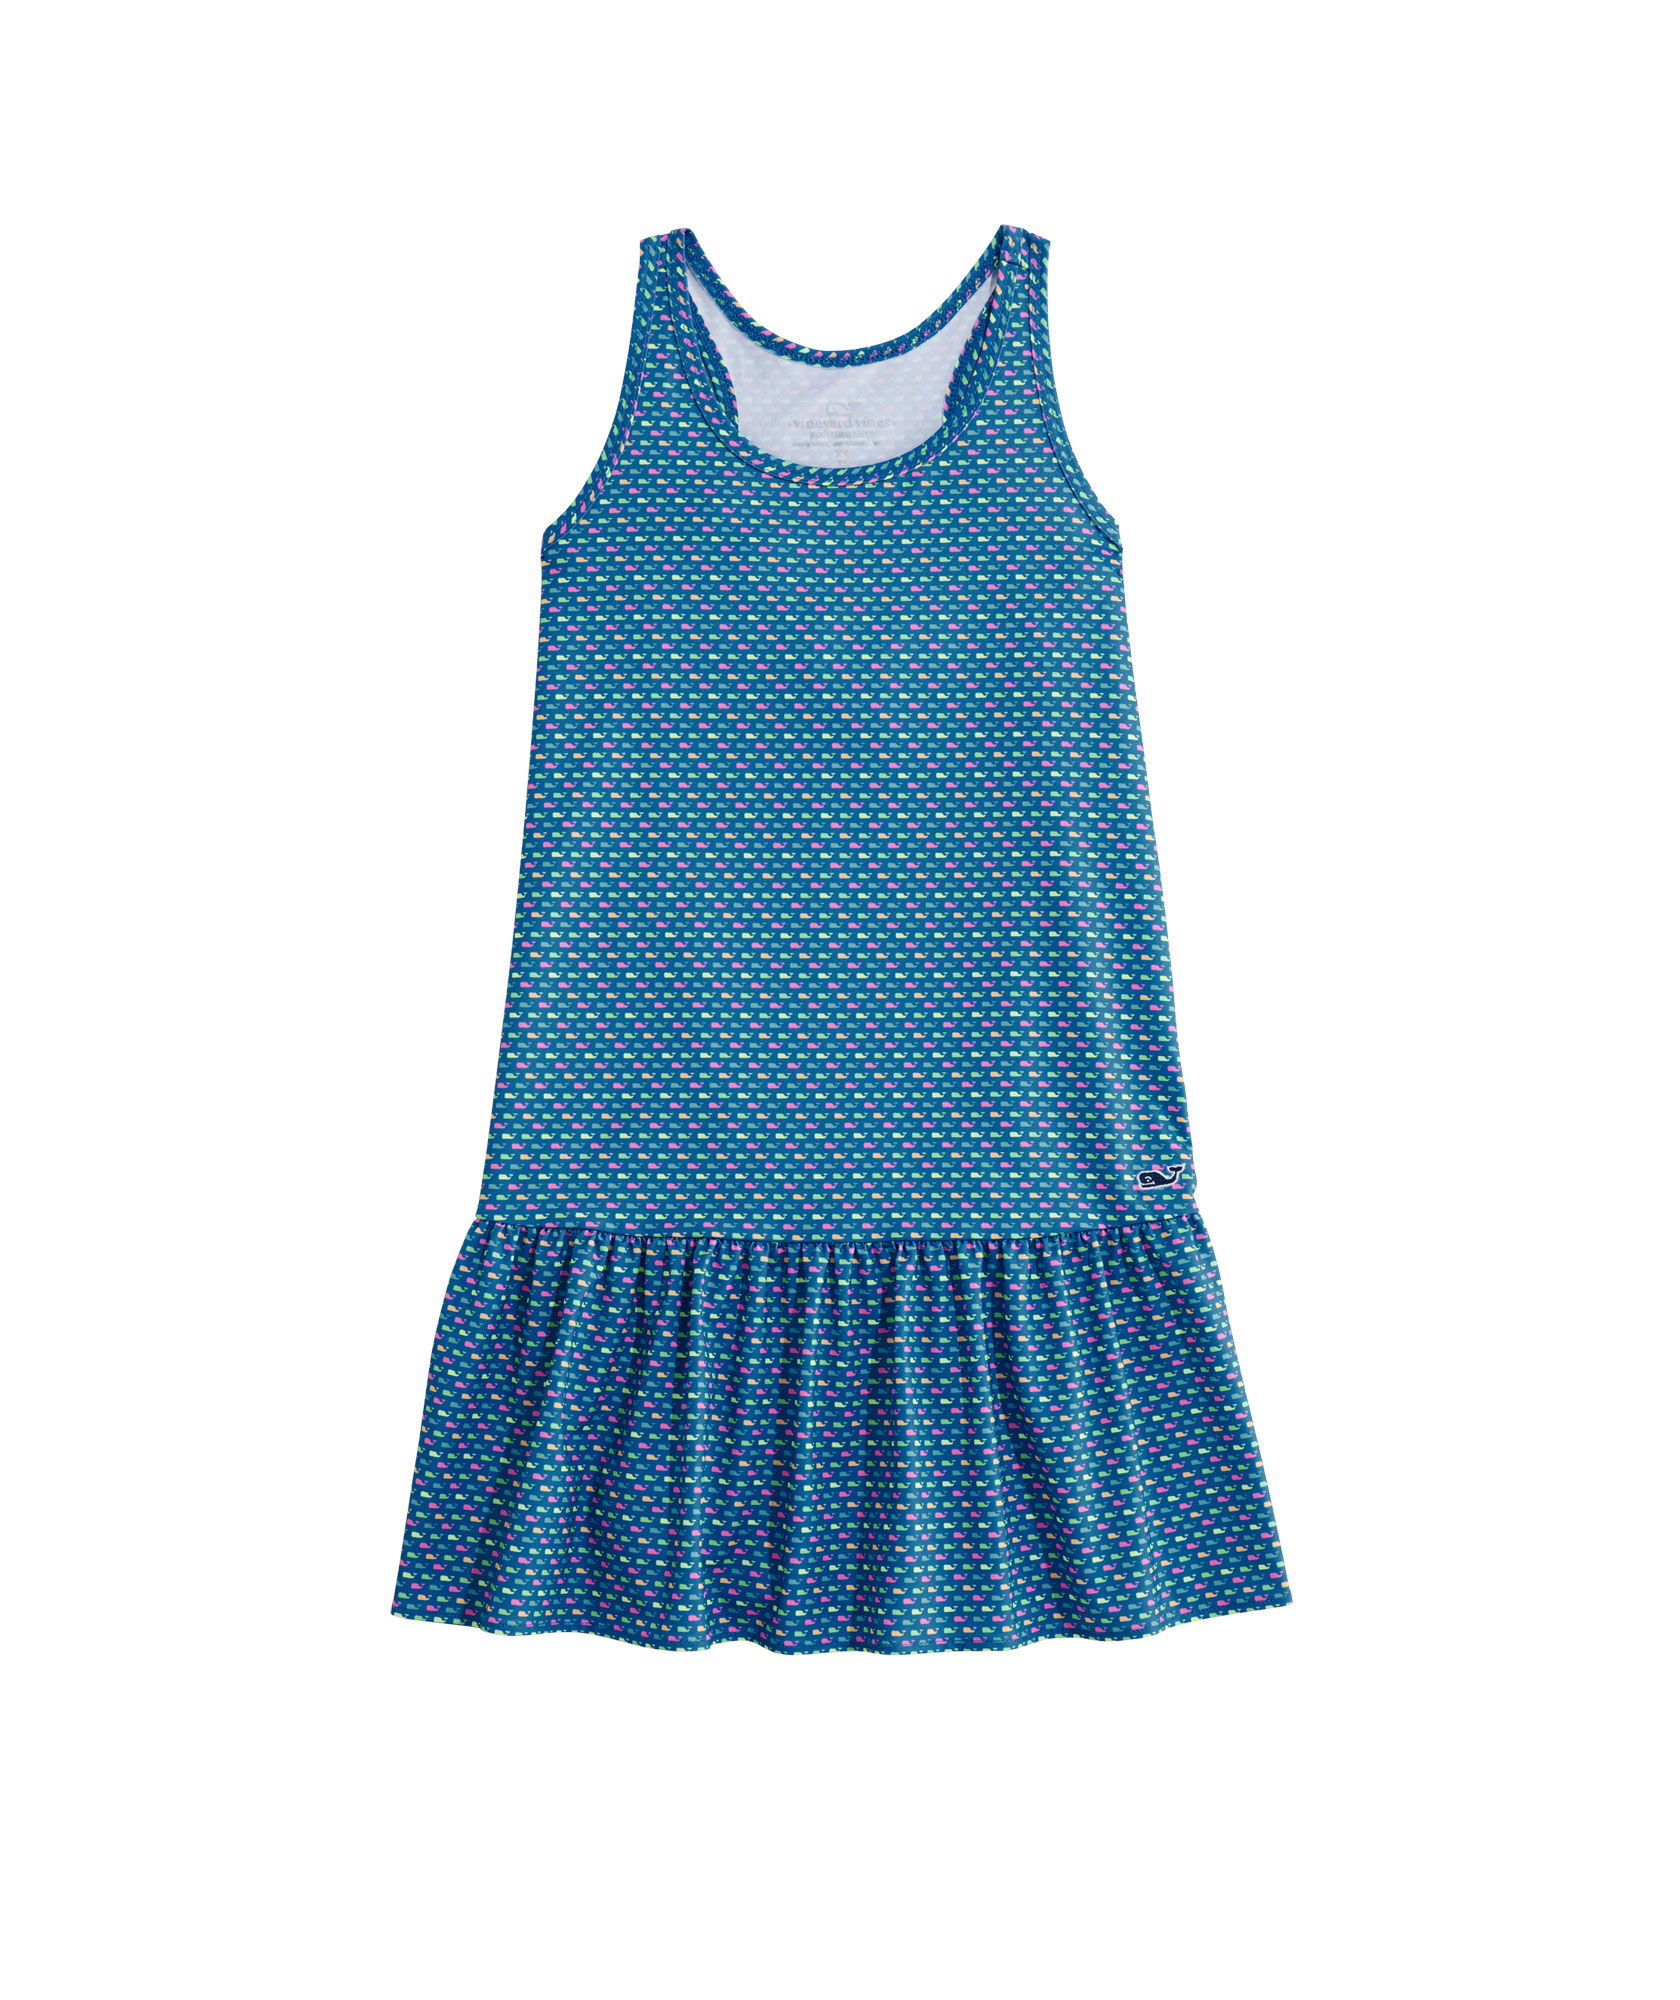 OUTLET Girls' Printed Performance Tank Dress